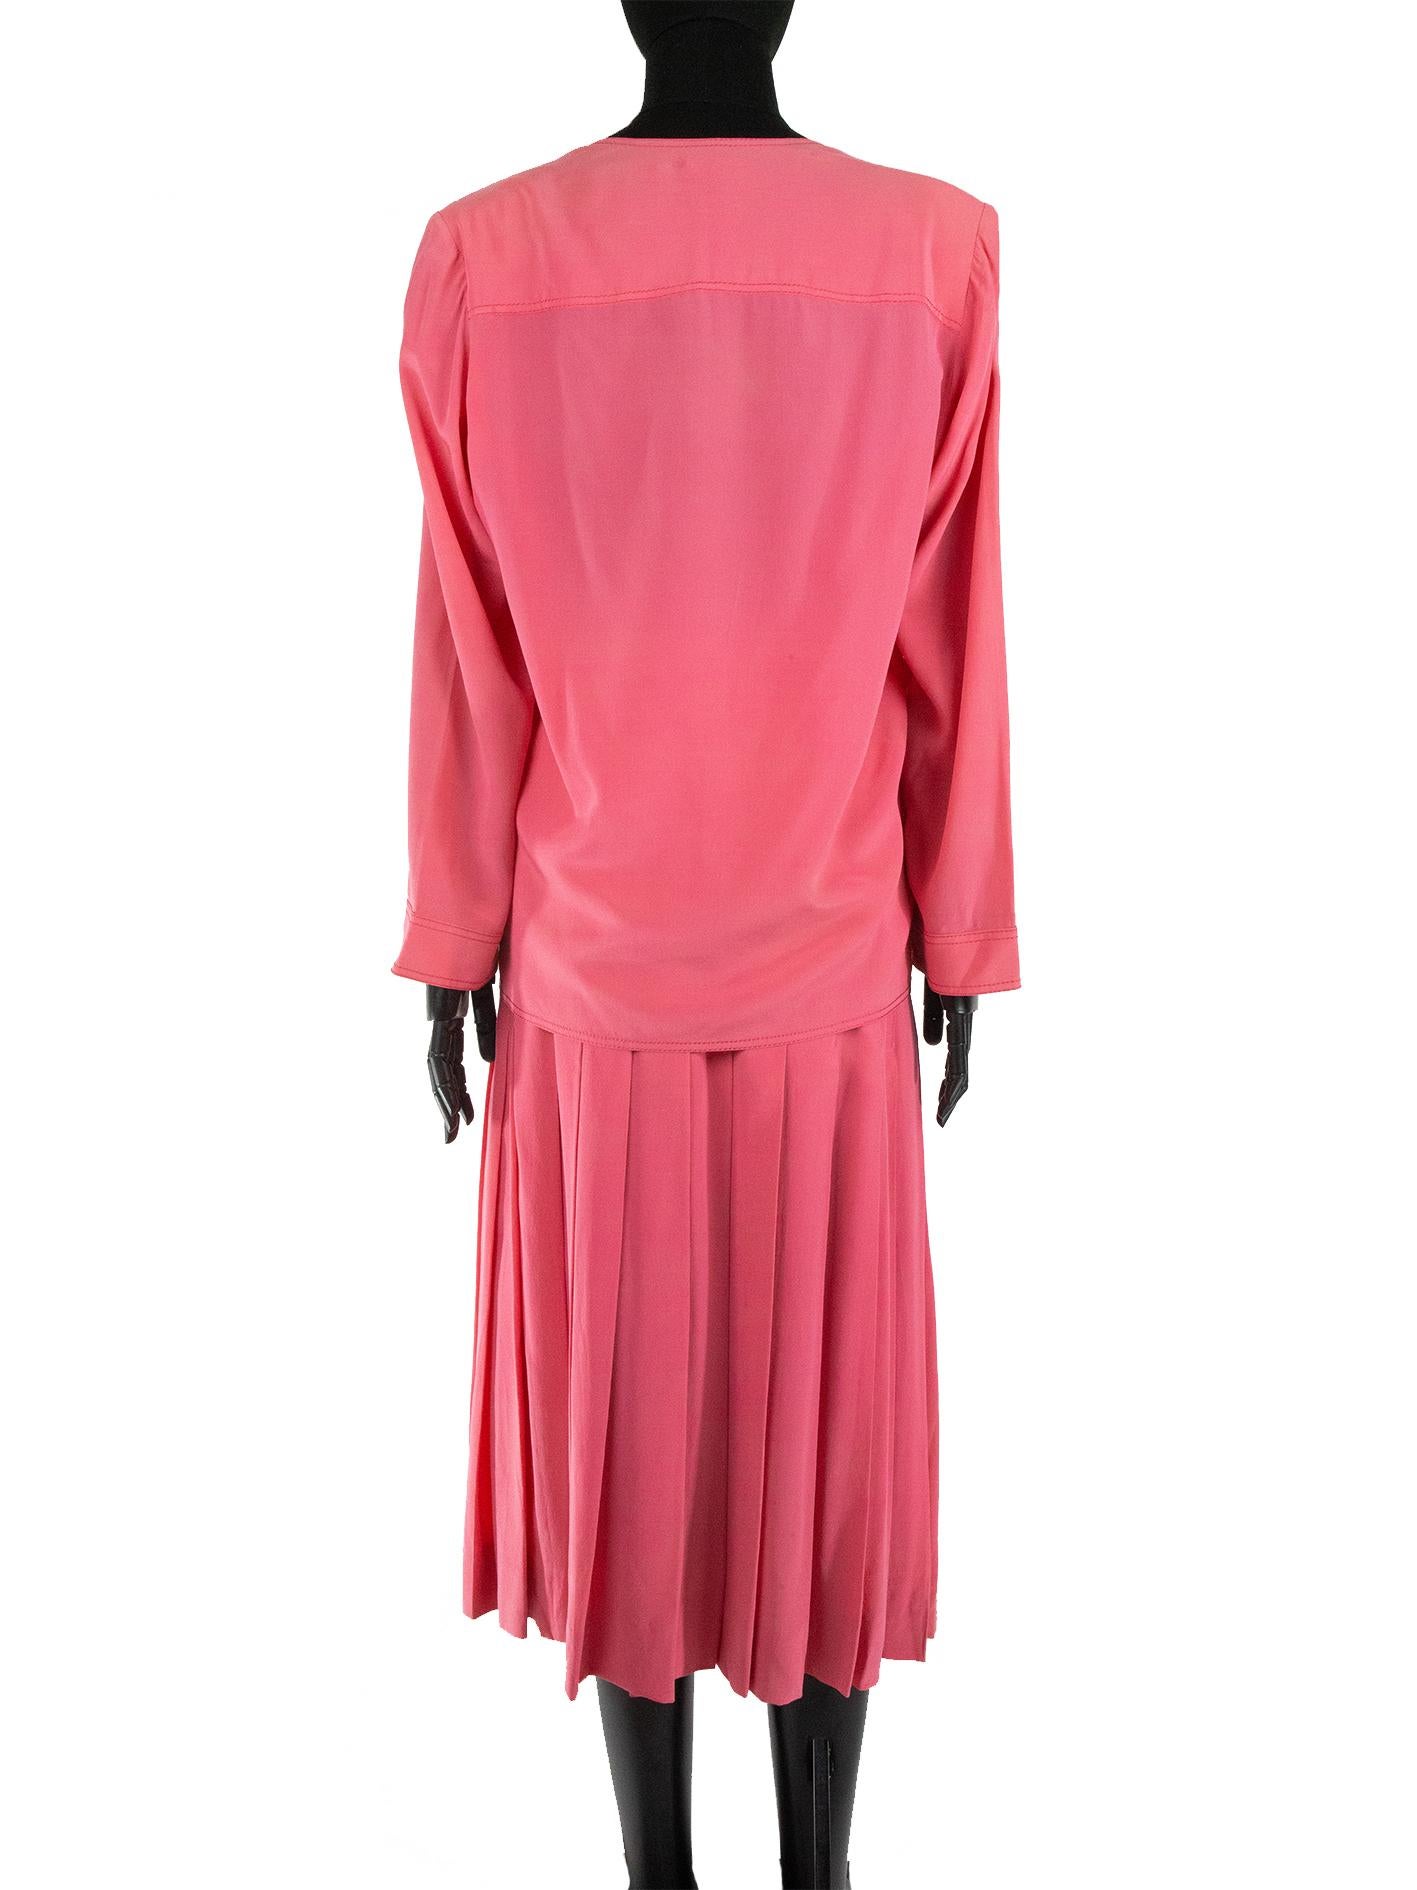 1980s Chanel Coral Pink Two Piece Suit In Good Condition For Sale In London, GB